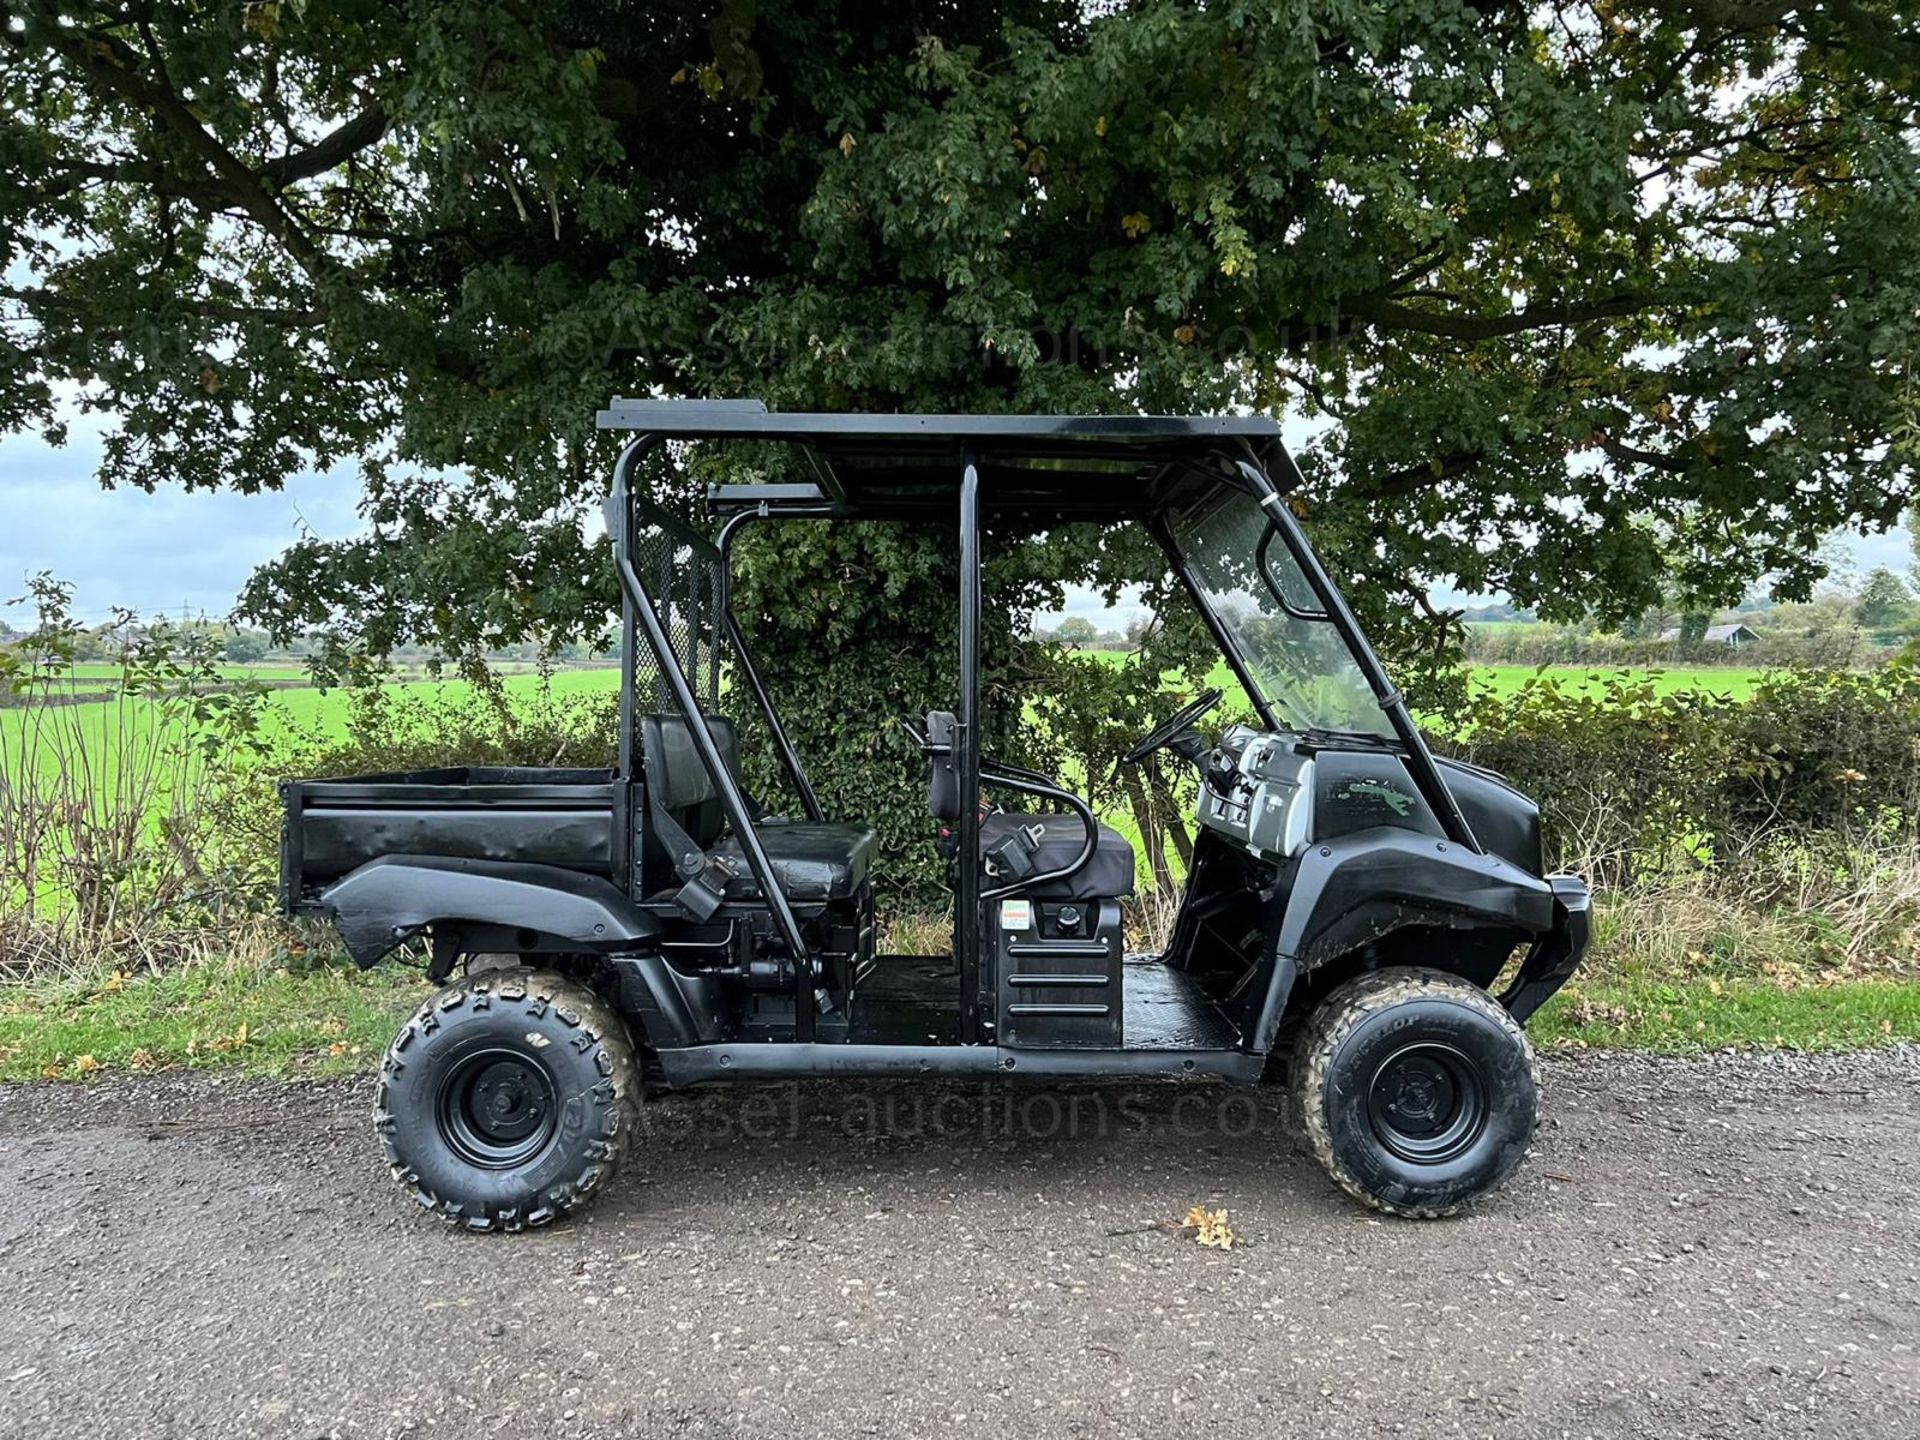 2011 KAWASAKI MULE 4010 4WD DIESEL BUGGI, RUNS AND DRIVES, SHOWING A LOW 2038 HOURS *PLUS VAT*